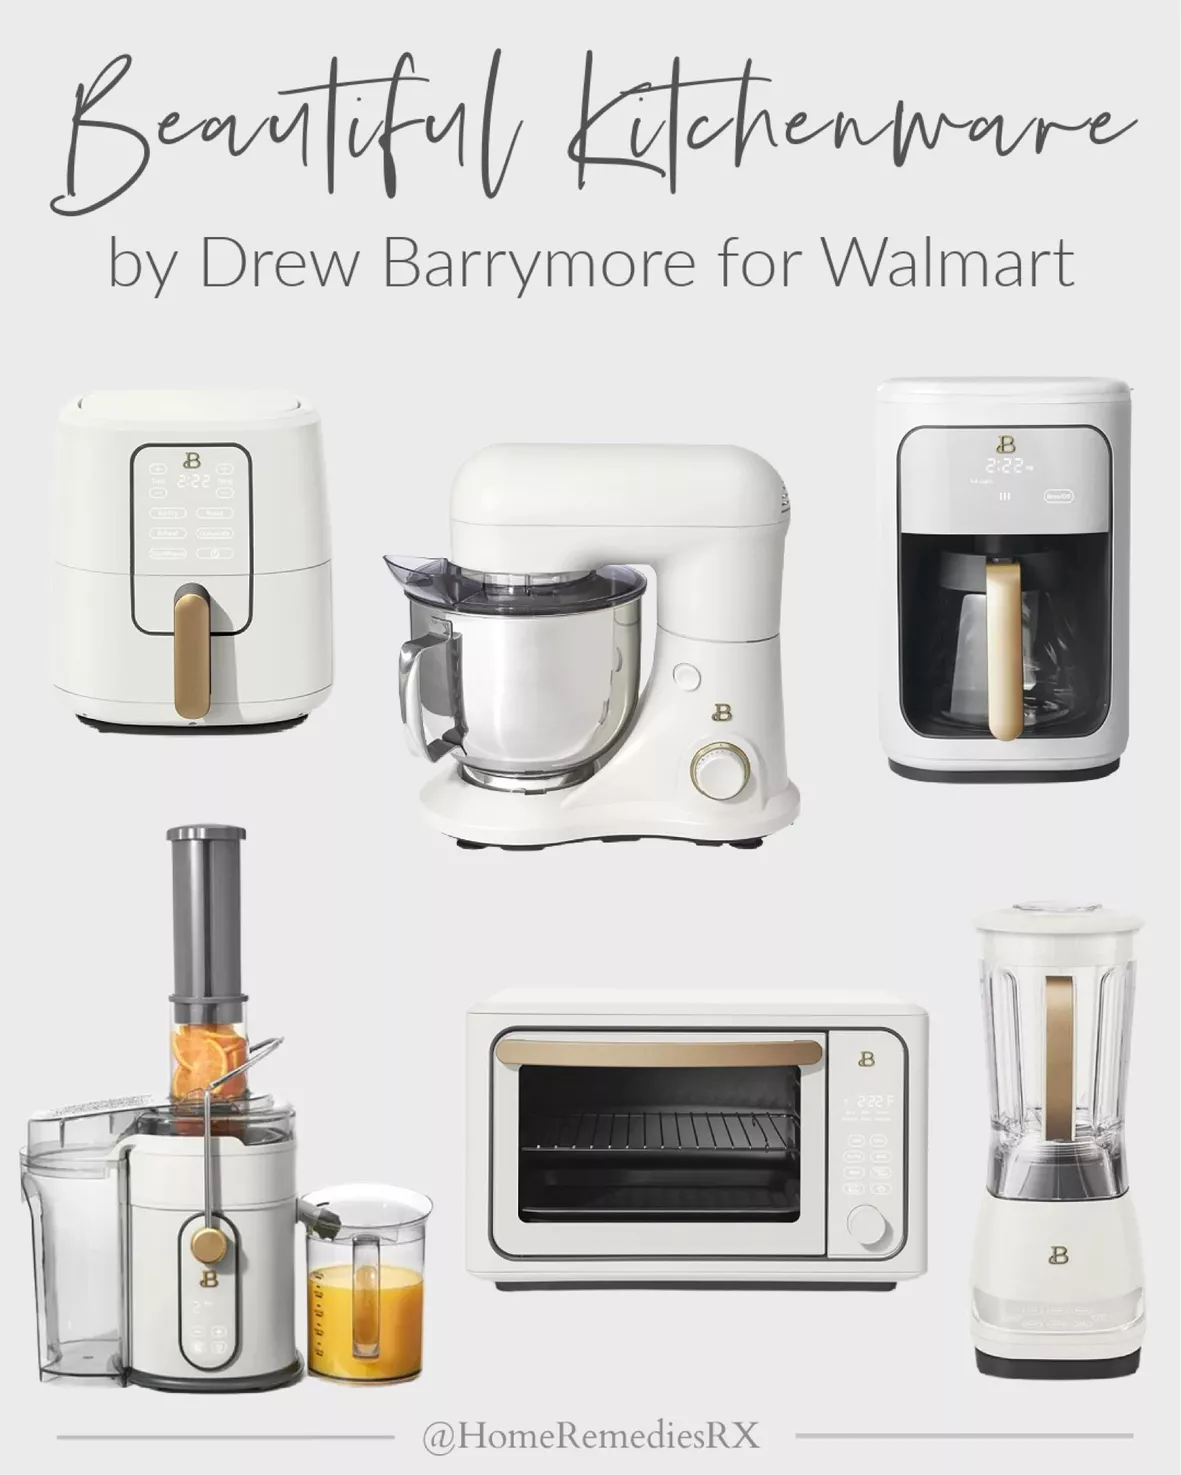 14 Cup Programmable Touchscreen Coffee Maker, White Icing by Drew Barrymore